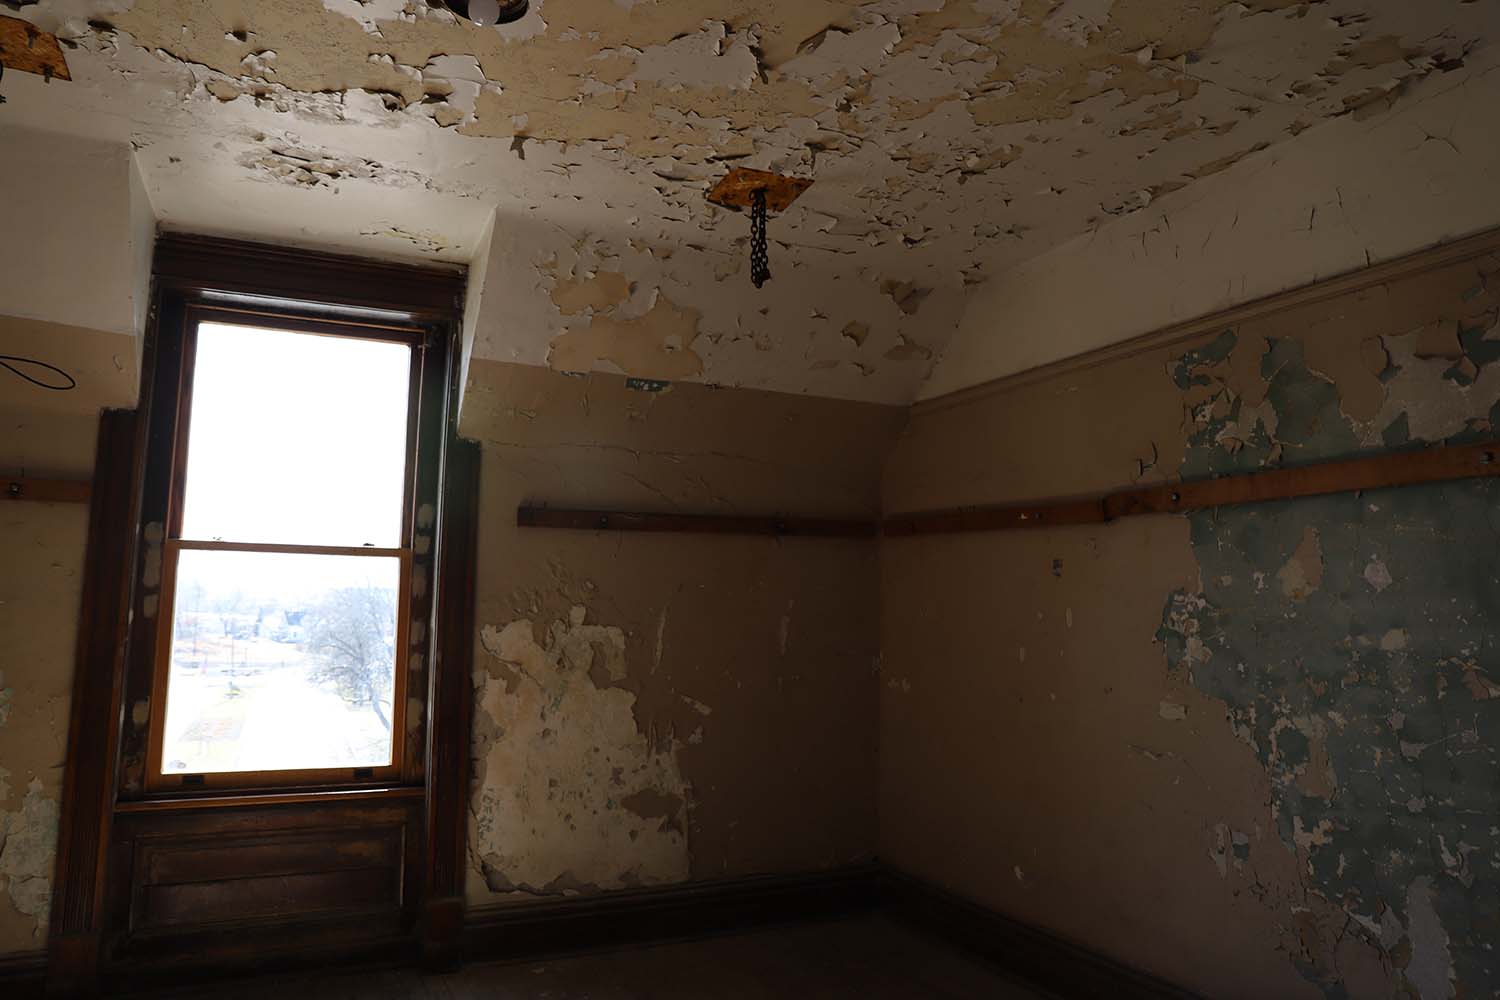 Mold Problems in Your Home or Building